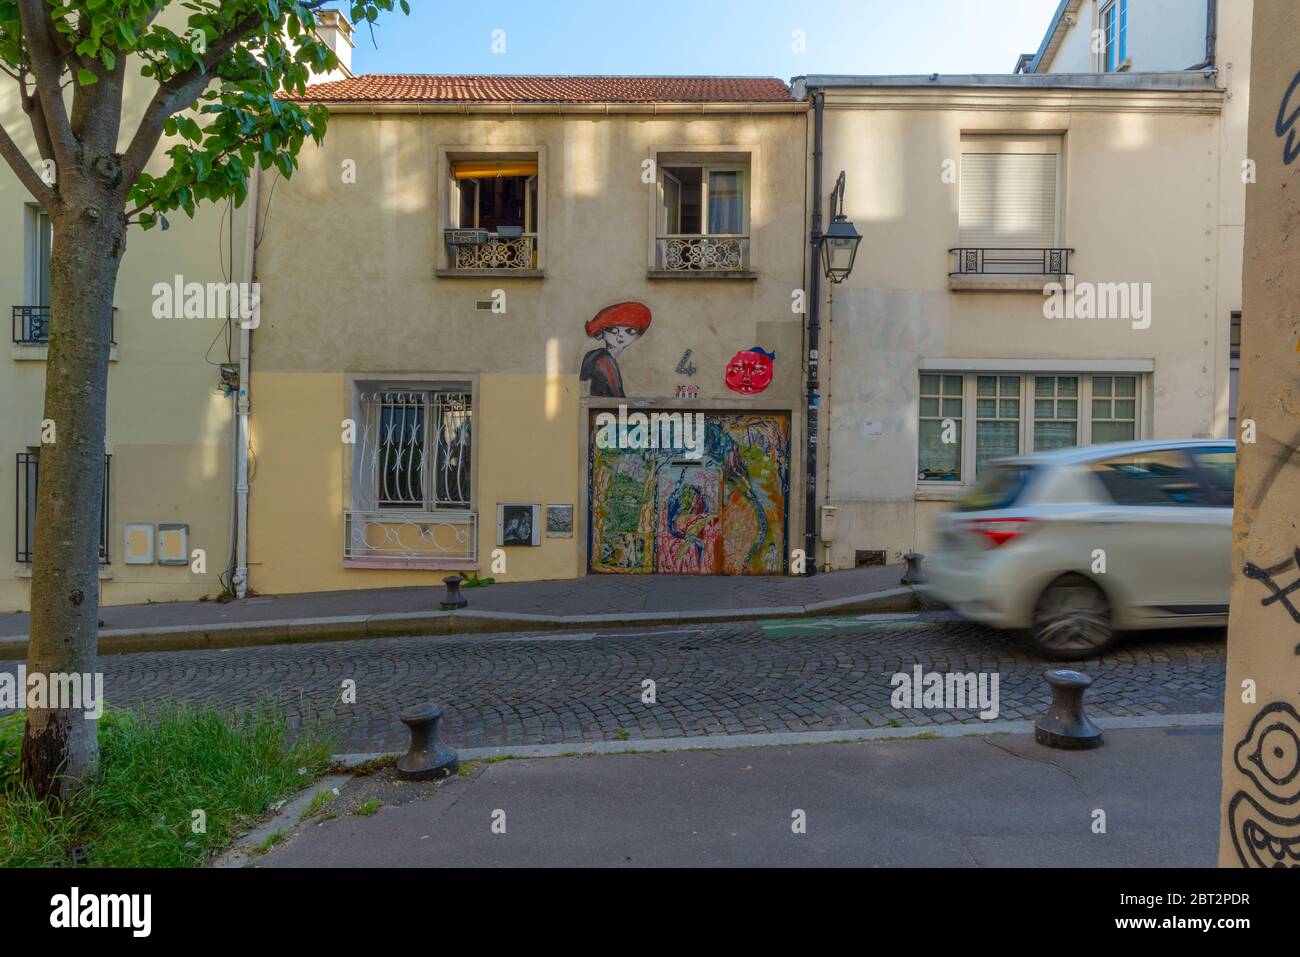 Paris, France - May 17, 2020: General view of various graffitis painted on a small building, taken at the end of the day, Butte-aux-Cailles Stock Photo